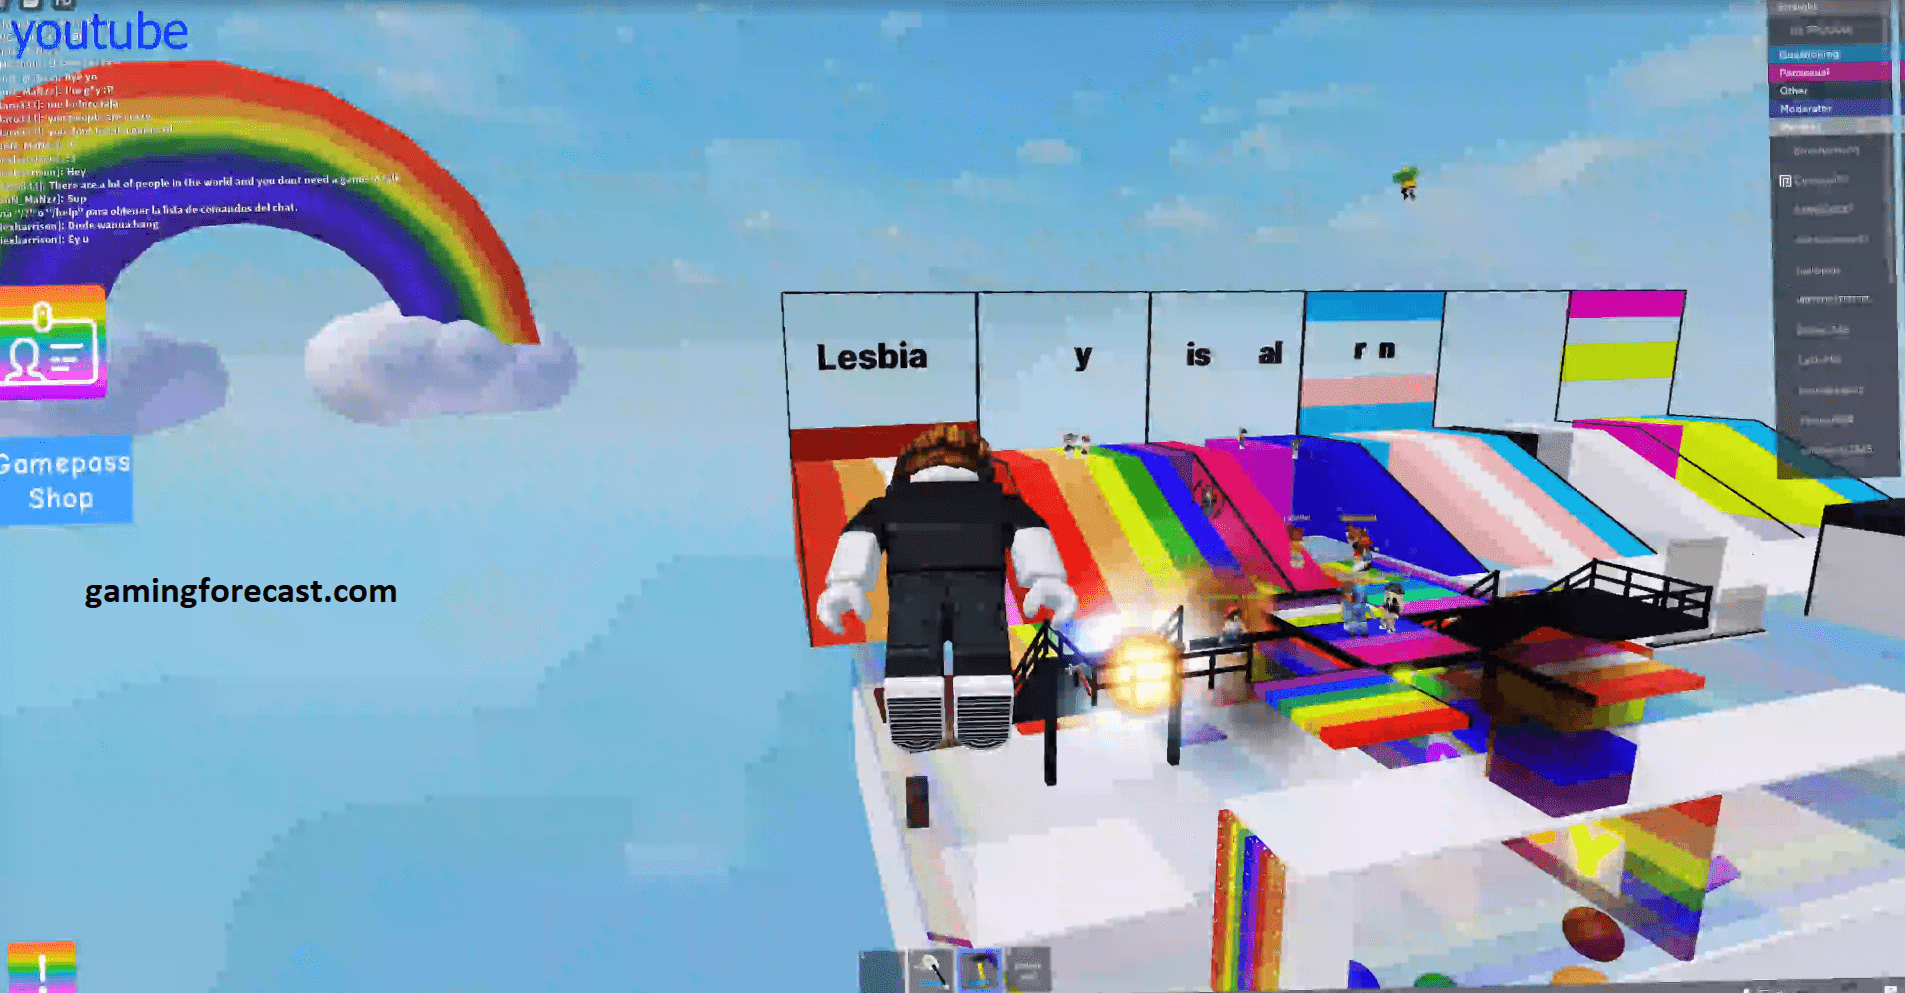 Roblox Hack Download Pc Destroy Lobby Fly Aimbot Scripts 2021 Gaming Forecast Download Free Online Game Hacks - roblox cheats unknown cheats